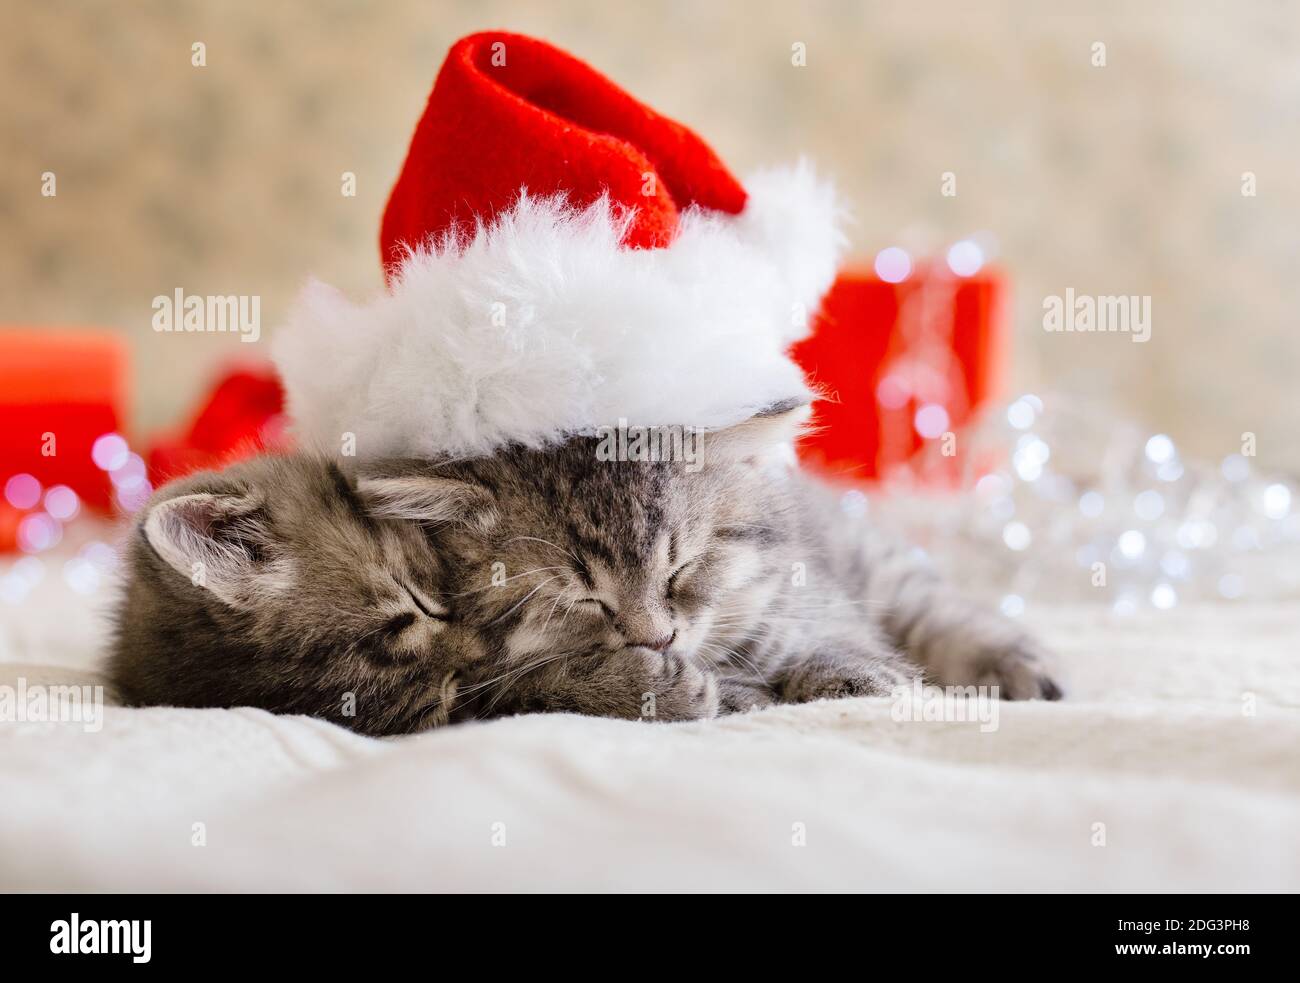 Cute tabby kittens sleeping together in christmas hat with garland lights, Xmas gifts. Santa Claus hat on pretty Baby cat. Christmas cats. Home pets Stock Photo